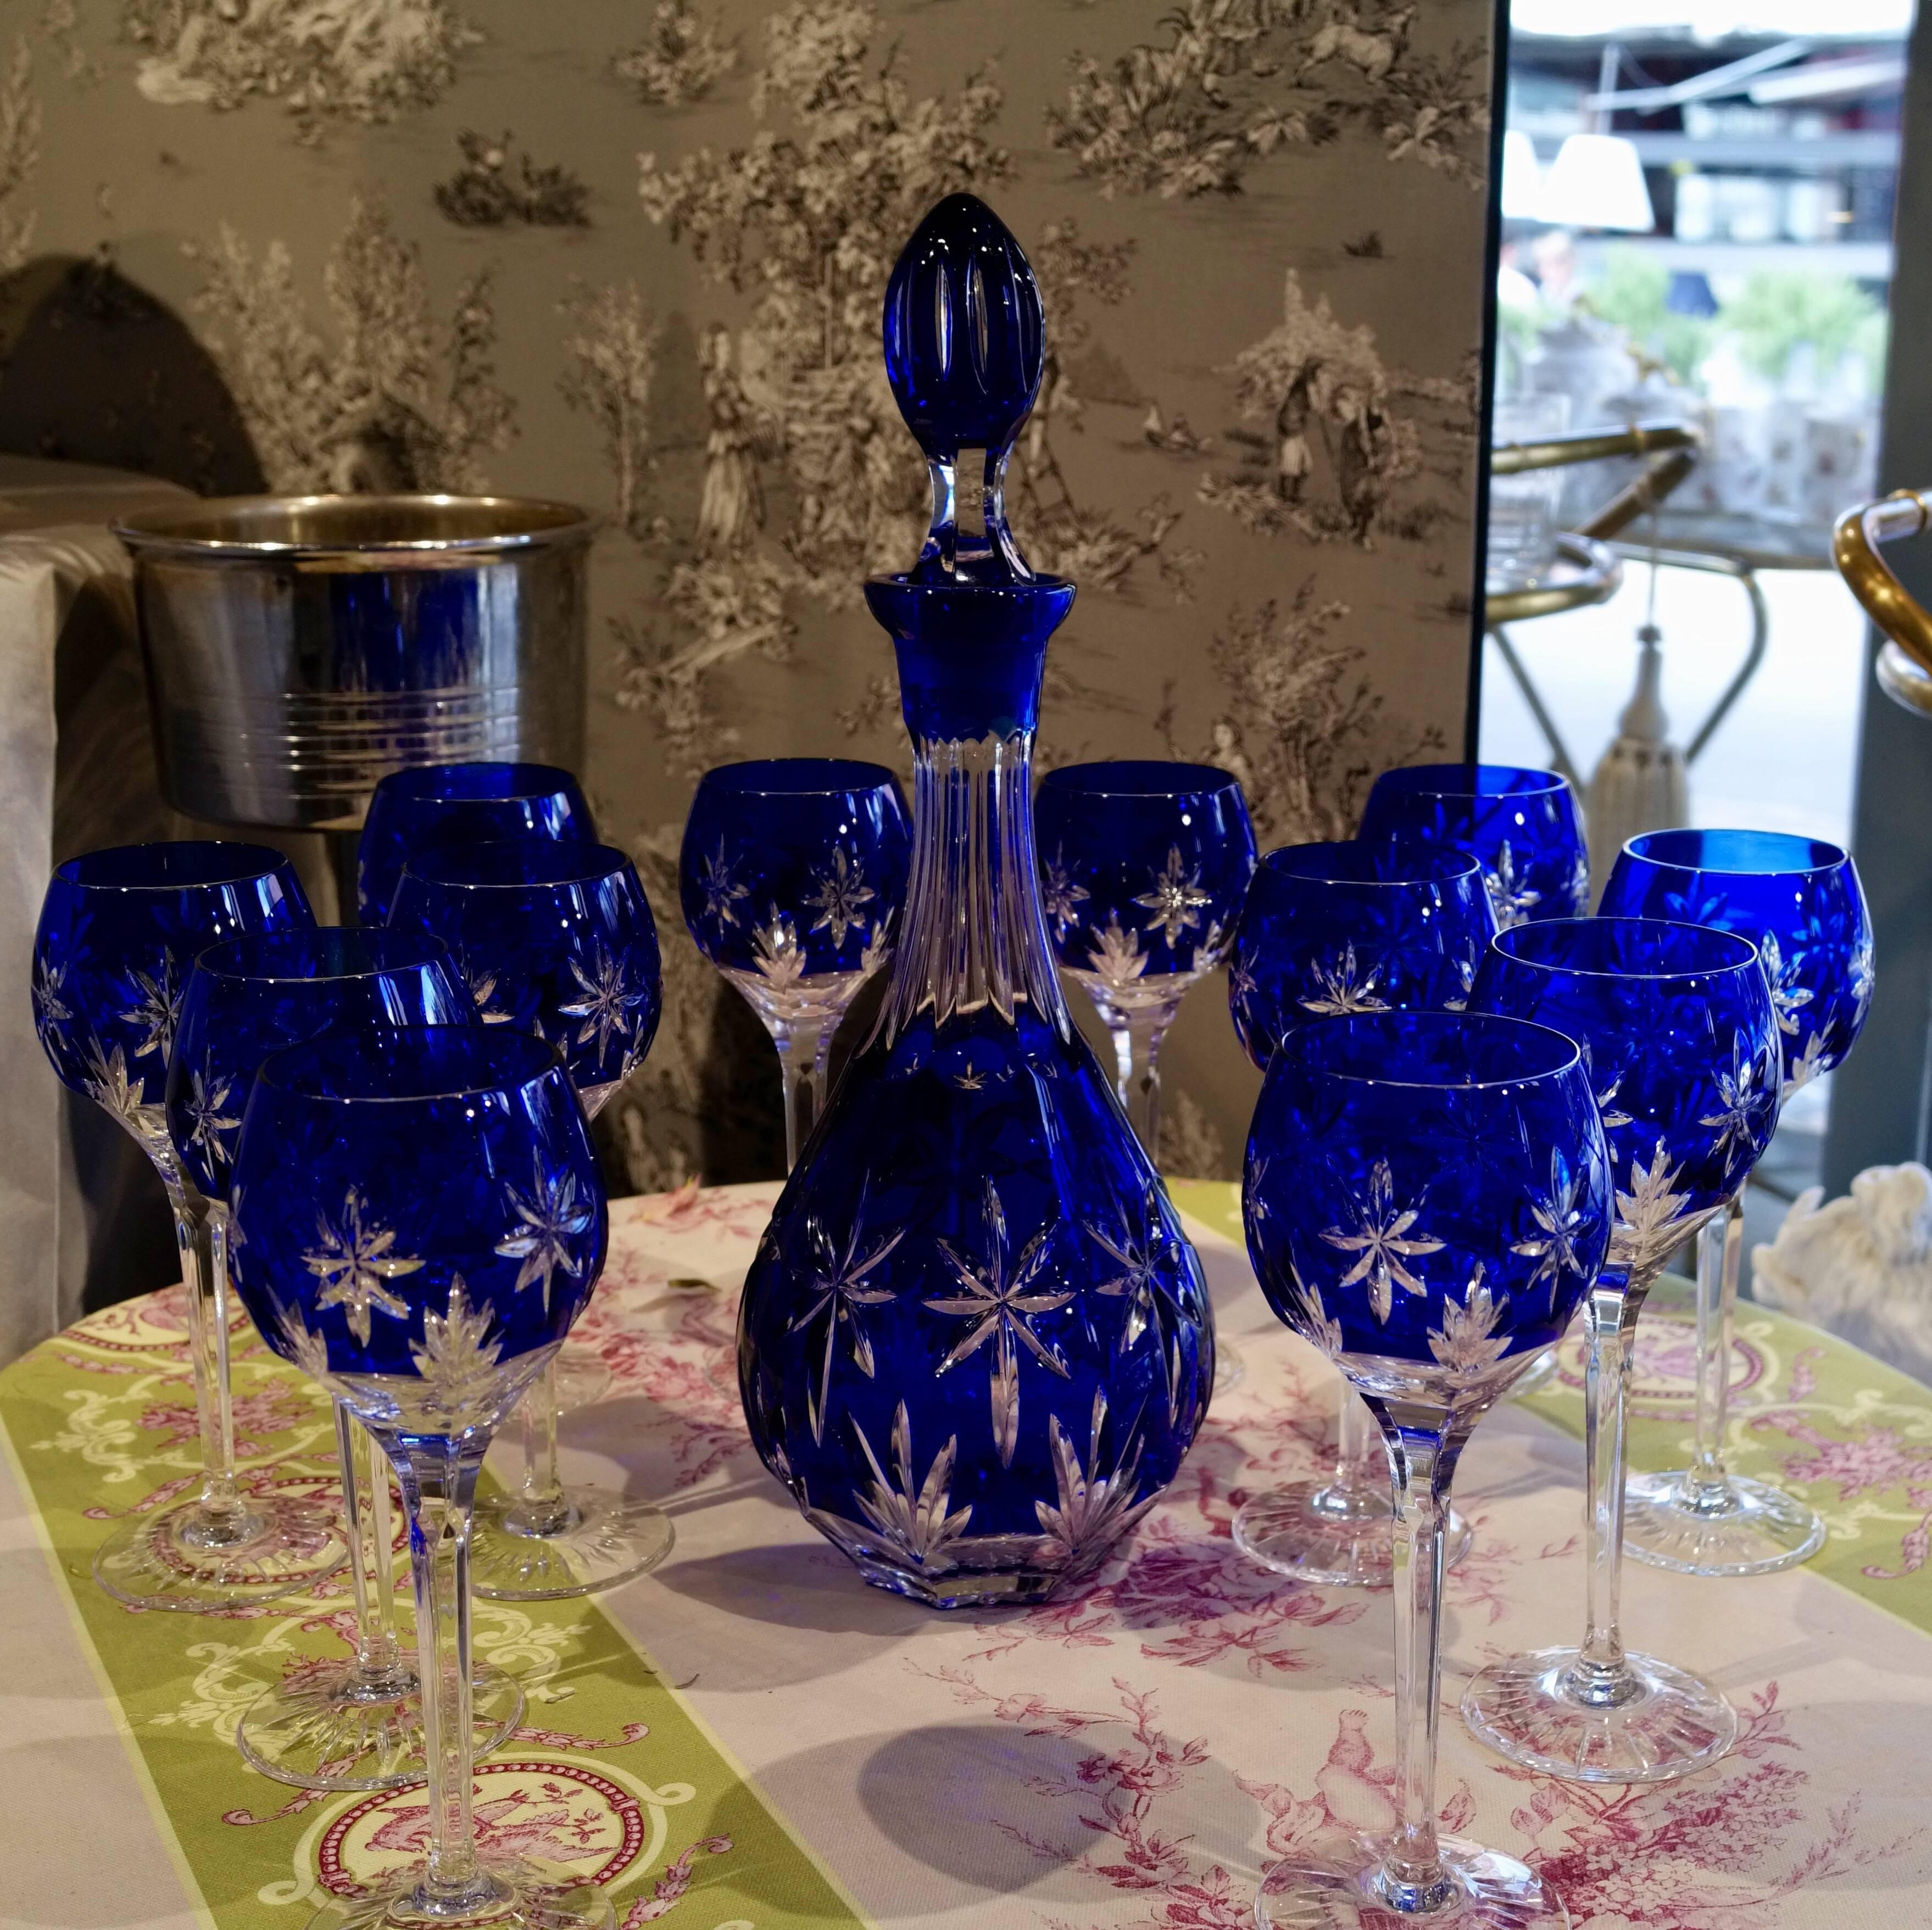 Blue crystal service, one carafe and 12 stemmed glasses, circa 1950.
Bohemian style !
Nice deep engravings. In very good condition.
Dimensions : 
Glass : Height 21.5 cm / Diameter 6.5 cm
Carafe : Height 40.5 cm / Diameter 13.5.